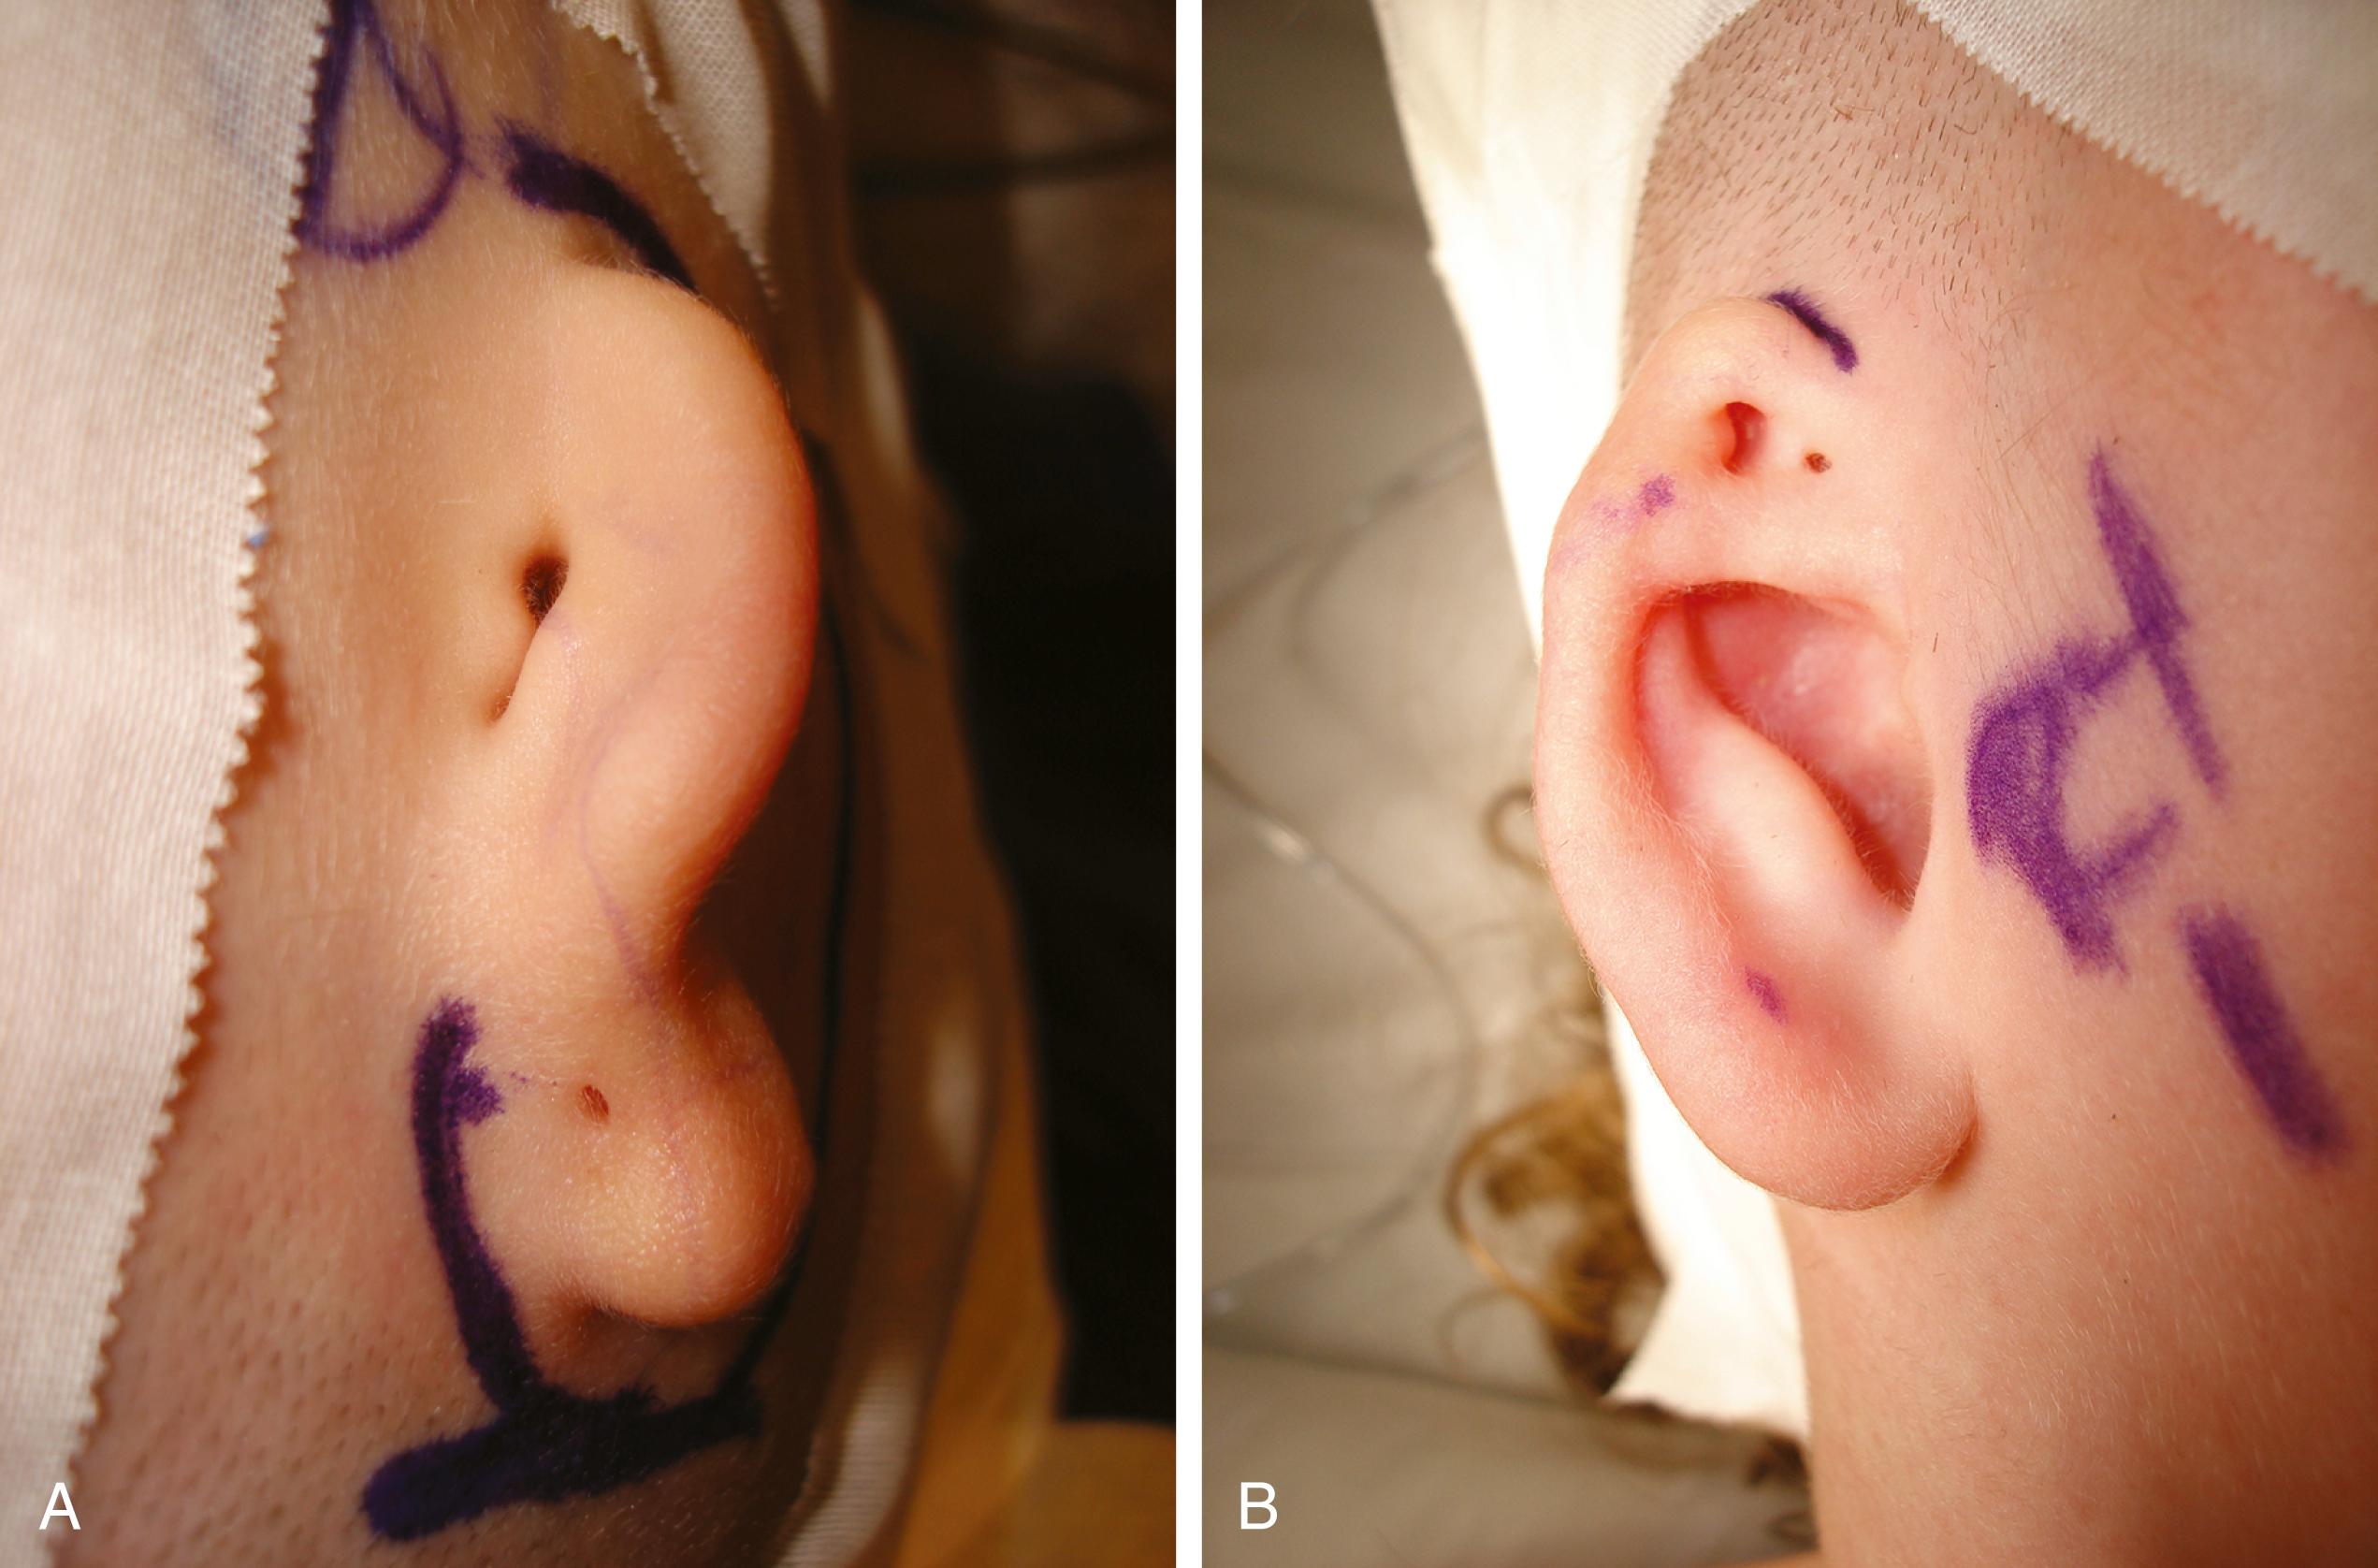 Fig. 24.16, (A) Grade 3 microtia and congenital aural atresia of the right external ear. In this otherwise normal child, the pinna failed to develop properly and the external canal was atretic. Audiometric testing revealed a 60-dB hearing loss. (B) Grade 2 microtia. Note deficiency of superior portion of auricle. Such isolated deformities stem from abnormal development of the first and second branchial arches.